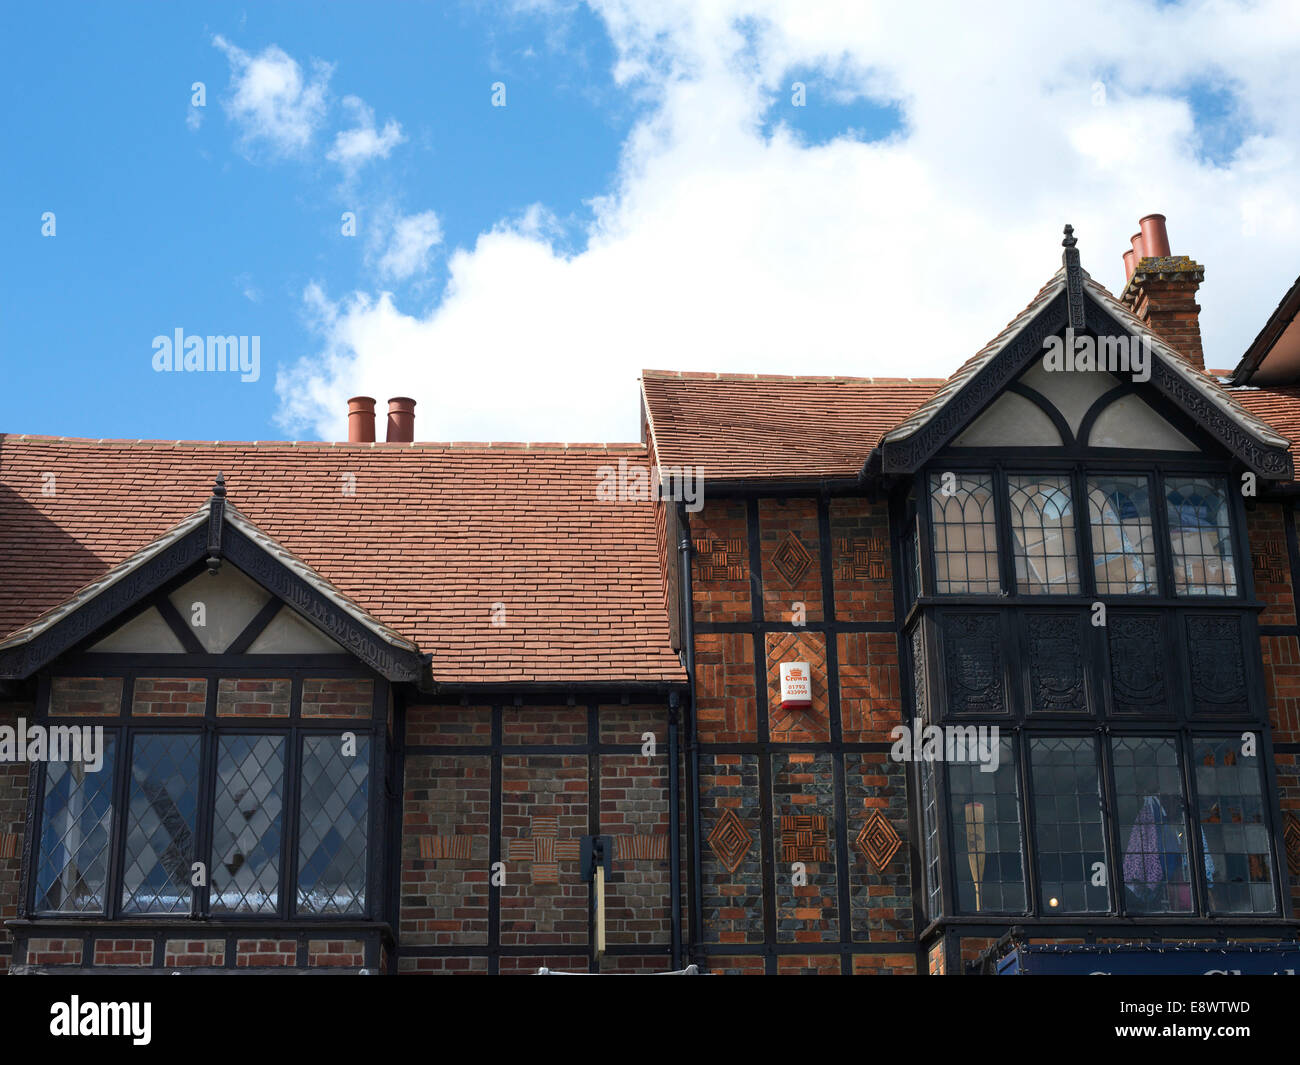 Timber framed buildings in Marlborough, Great Bedwyn, Savernake Forest, Wiltshire, England, UK. Stock Photo